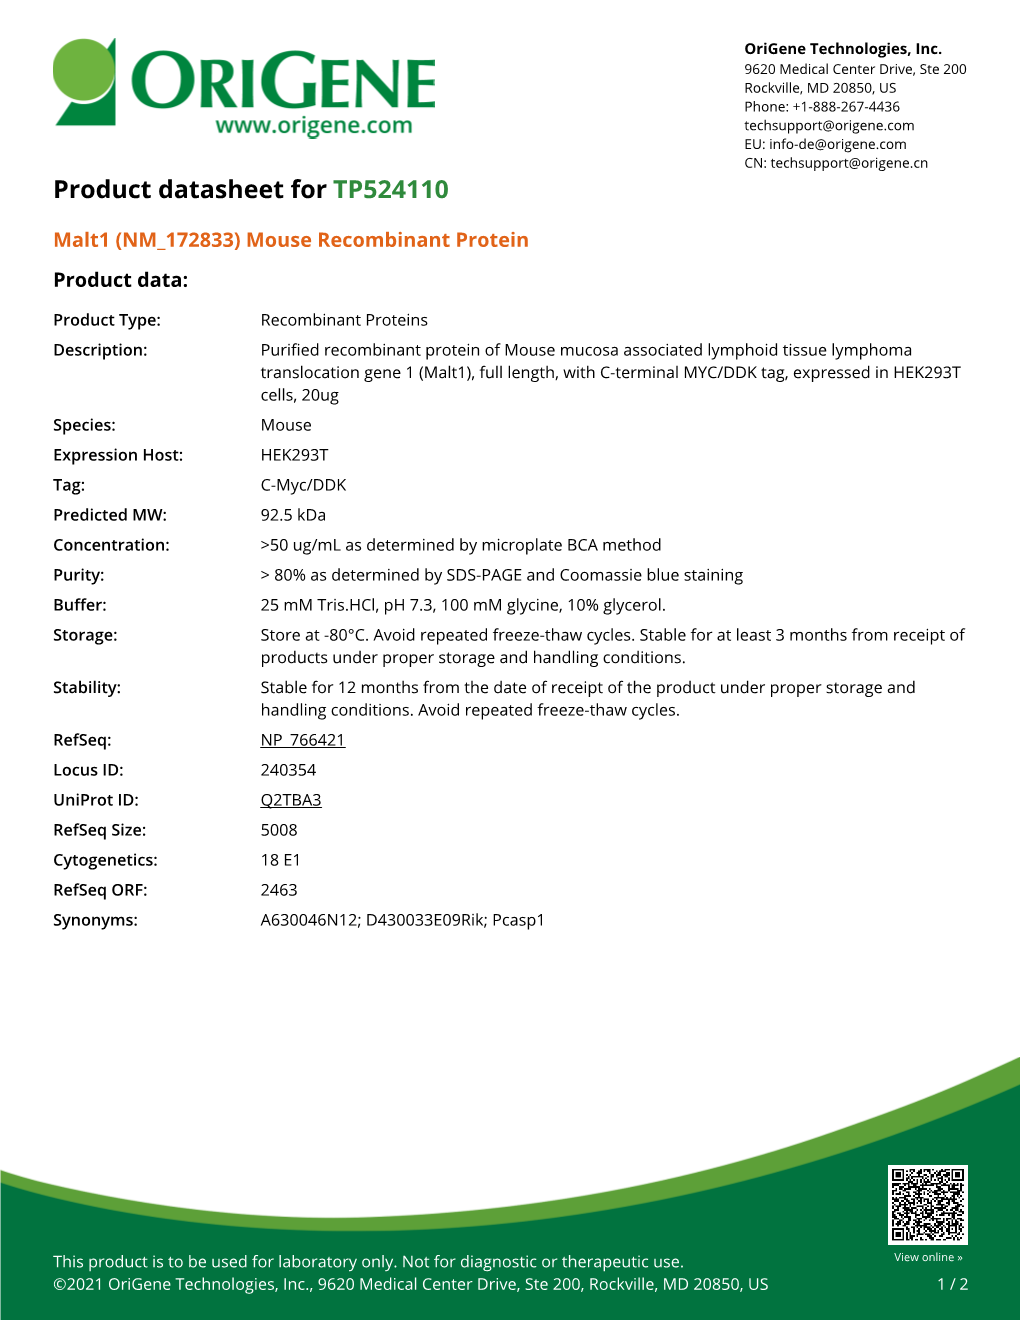 Malt1 (NM 172833) Mouse Recombinant Protein Product Data